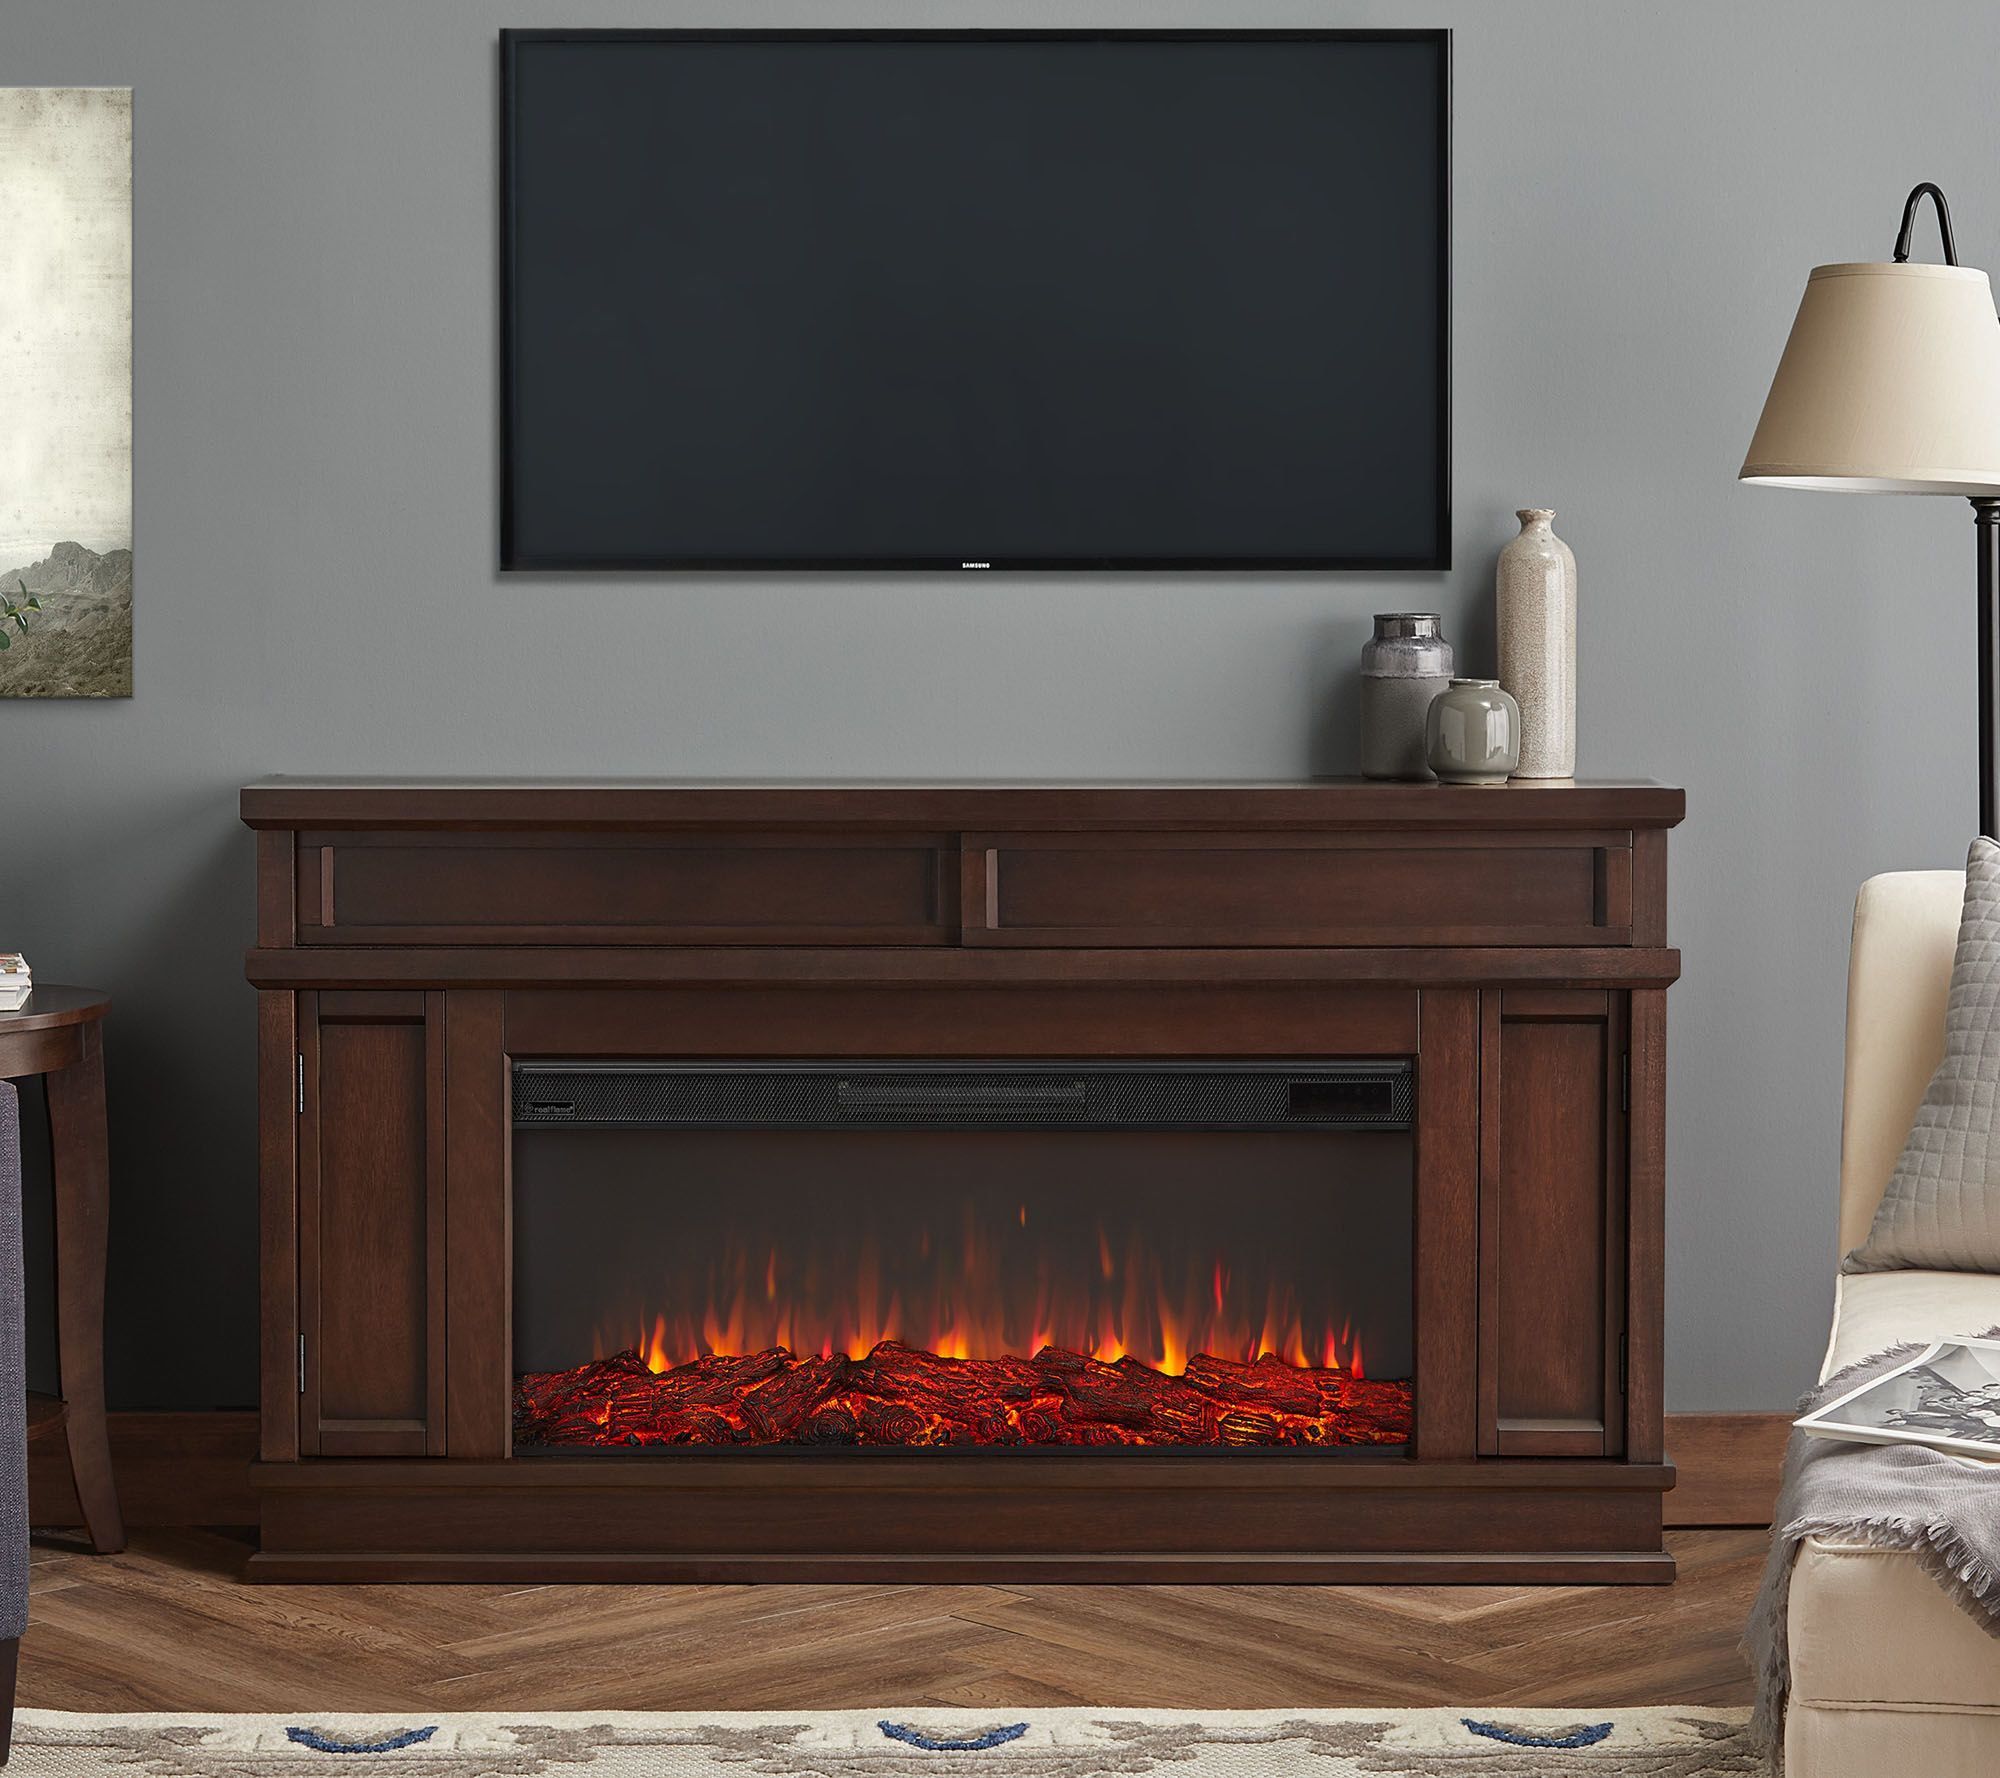 Real Flame Torrey Landscape Electric Fireplace - QVC.com